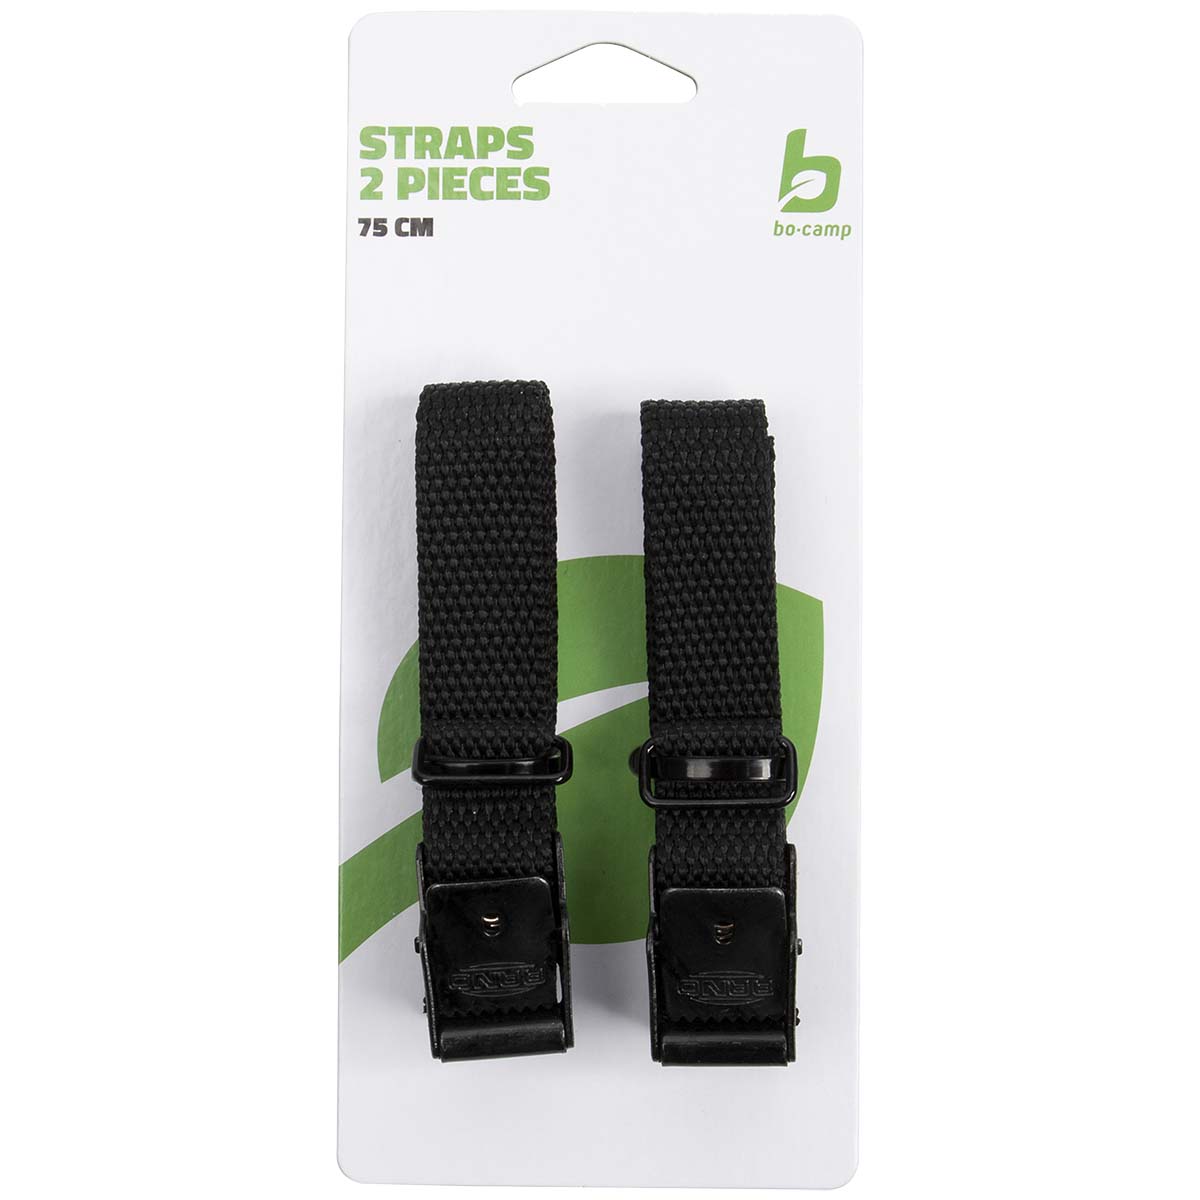 5410200 A universal tie strap of the highest quality. This multifunctional tie strap can be tied to almost anything. Equipped with an extra sturdy galvanized steel buckle. Packed in units of 2.